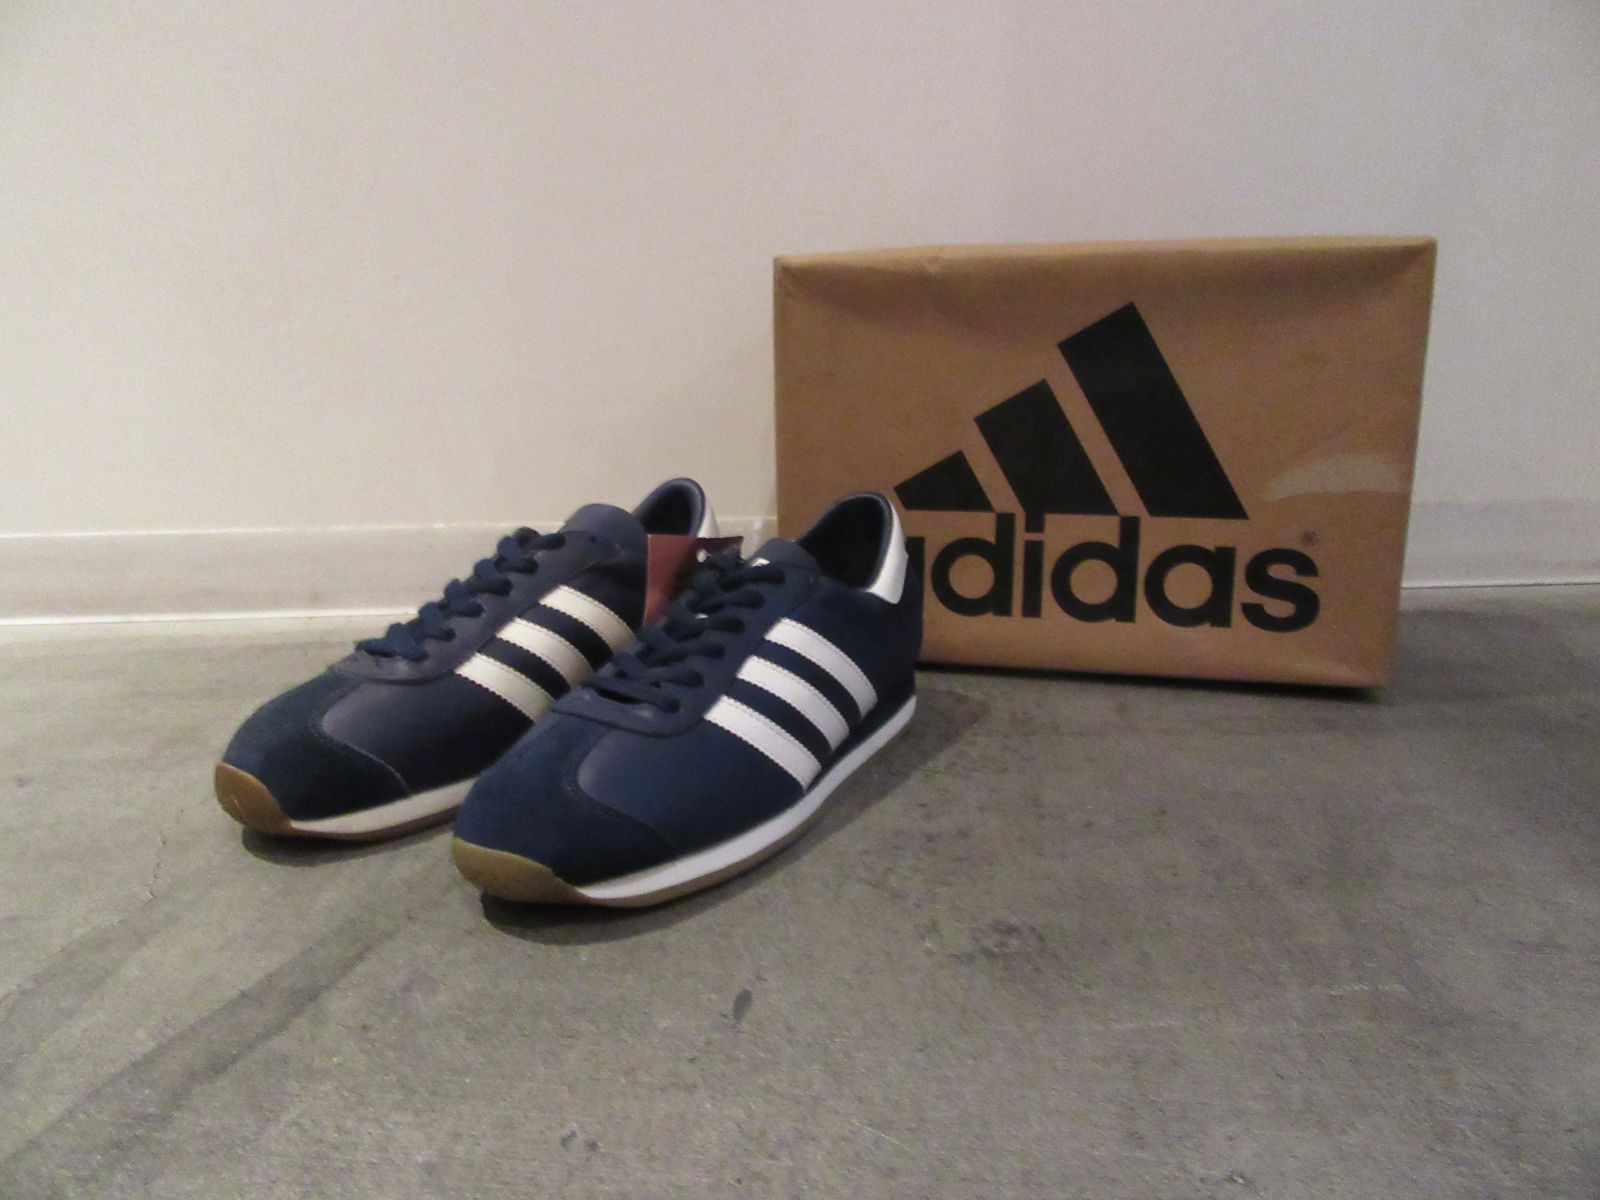 Aanstellen storting musicus adidas】90's Dead Stock LA MARQUE AUX3 BANDES' Sneakers ： vintage & used  clothing ROGER'S